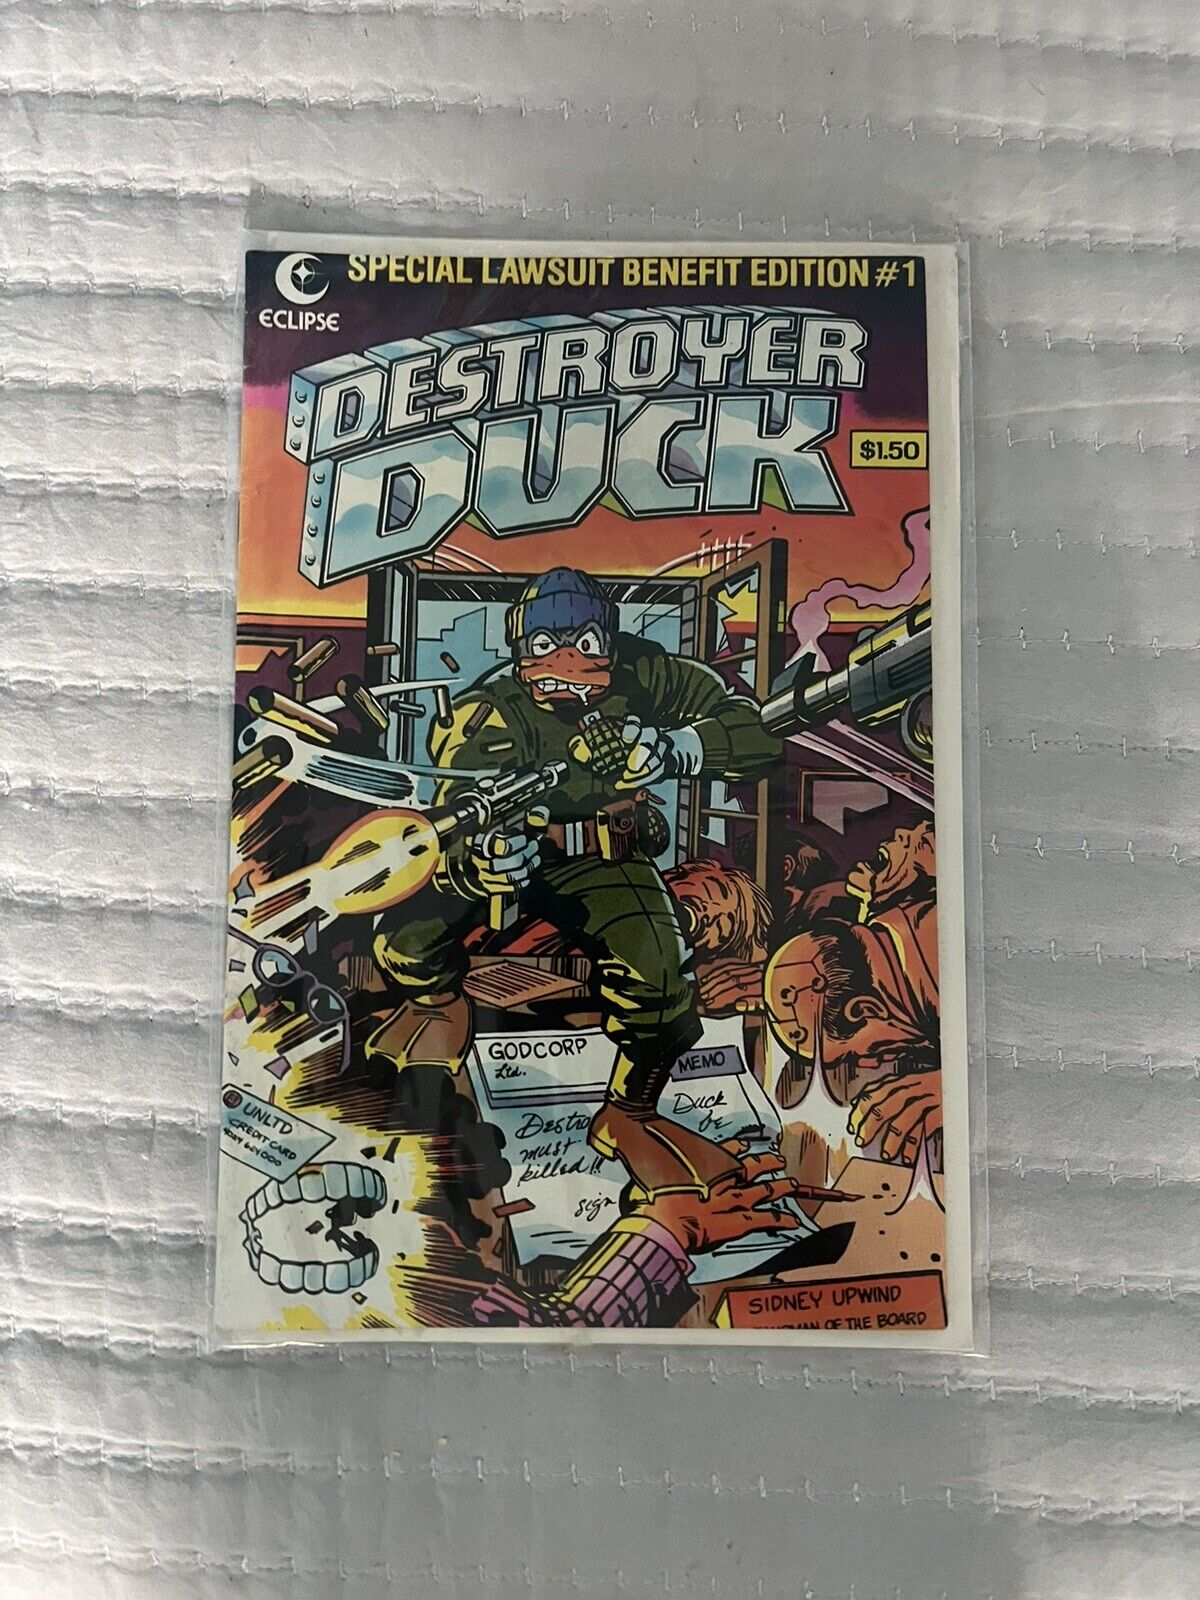 DESTROYER DUCK SPECIAL LAWSUIT BENEFIT EDITION #1, 1ST GROO THE WANDERER,